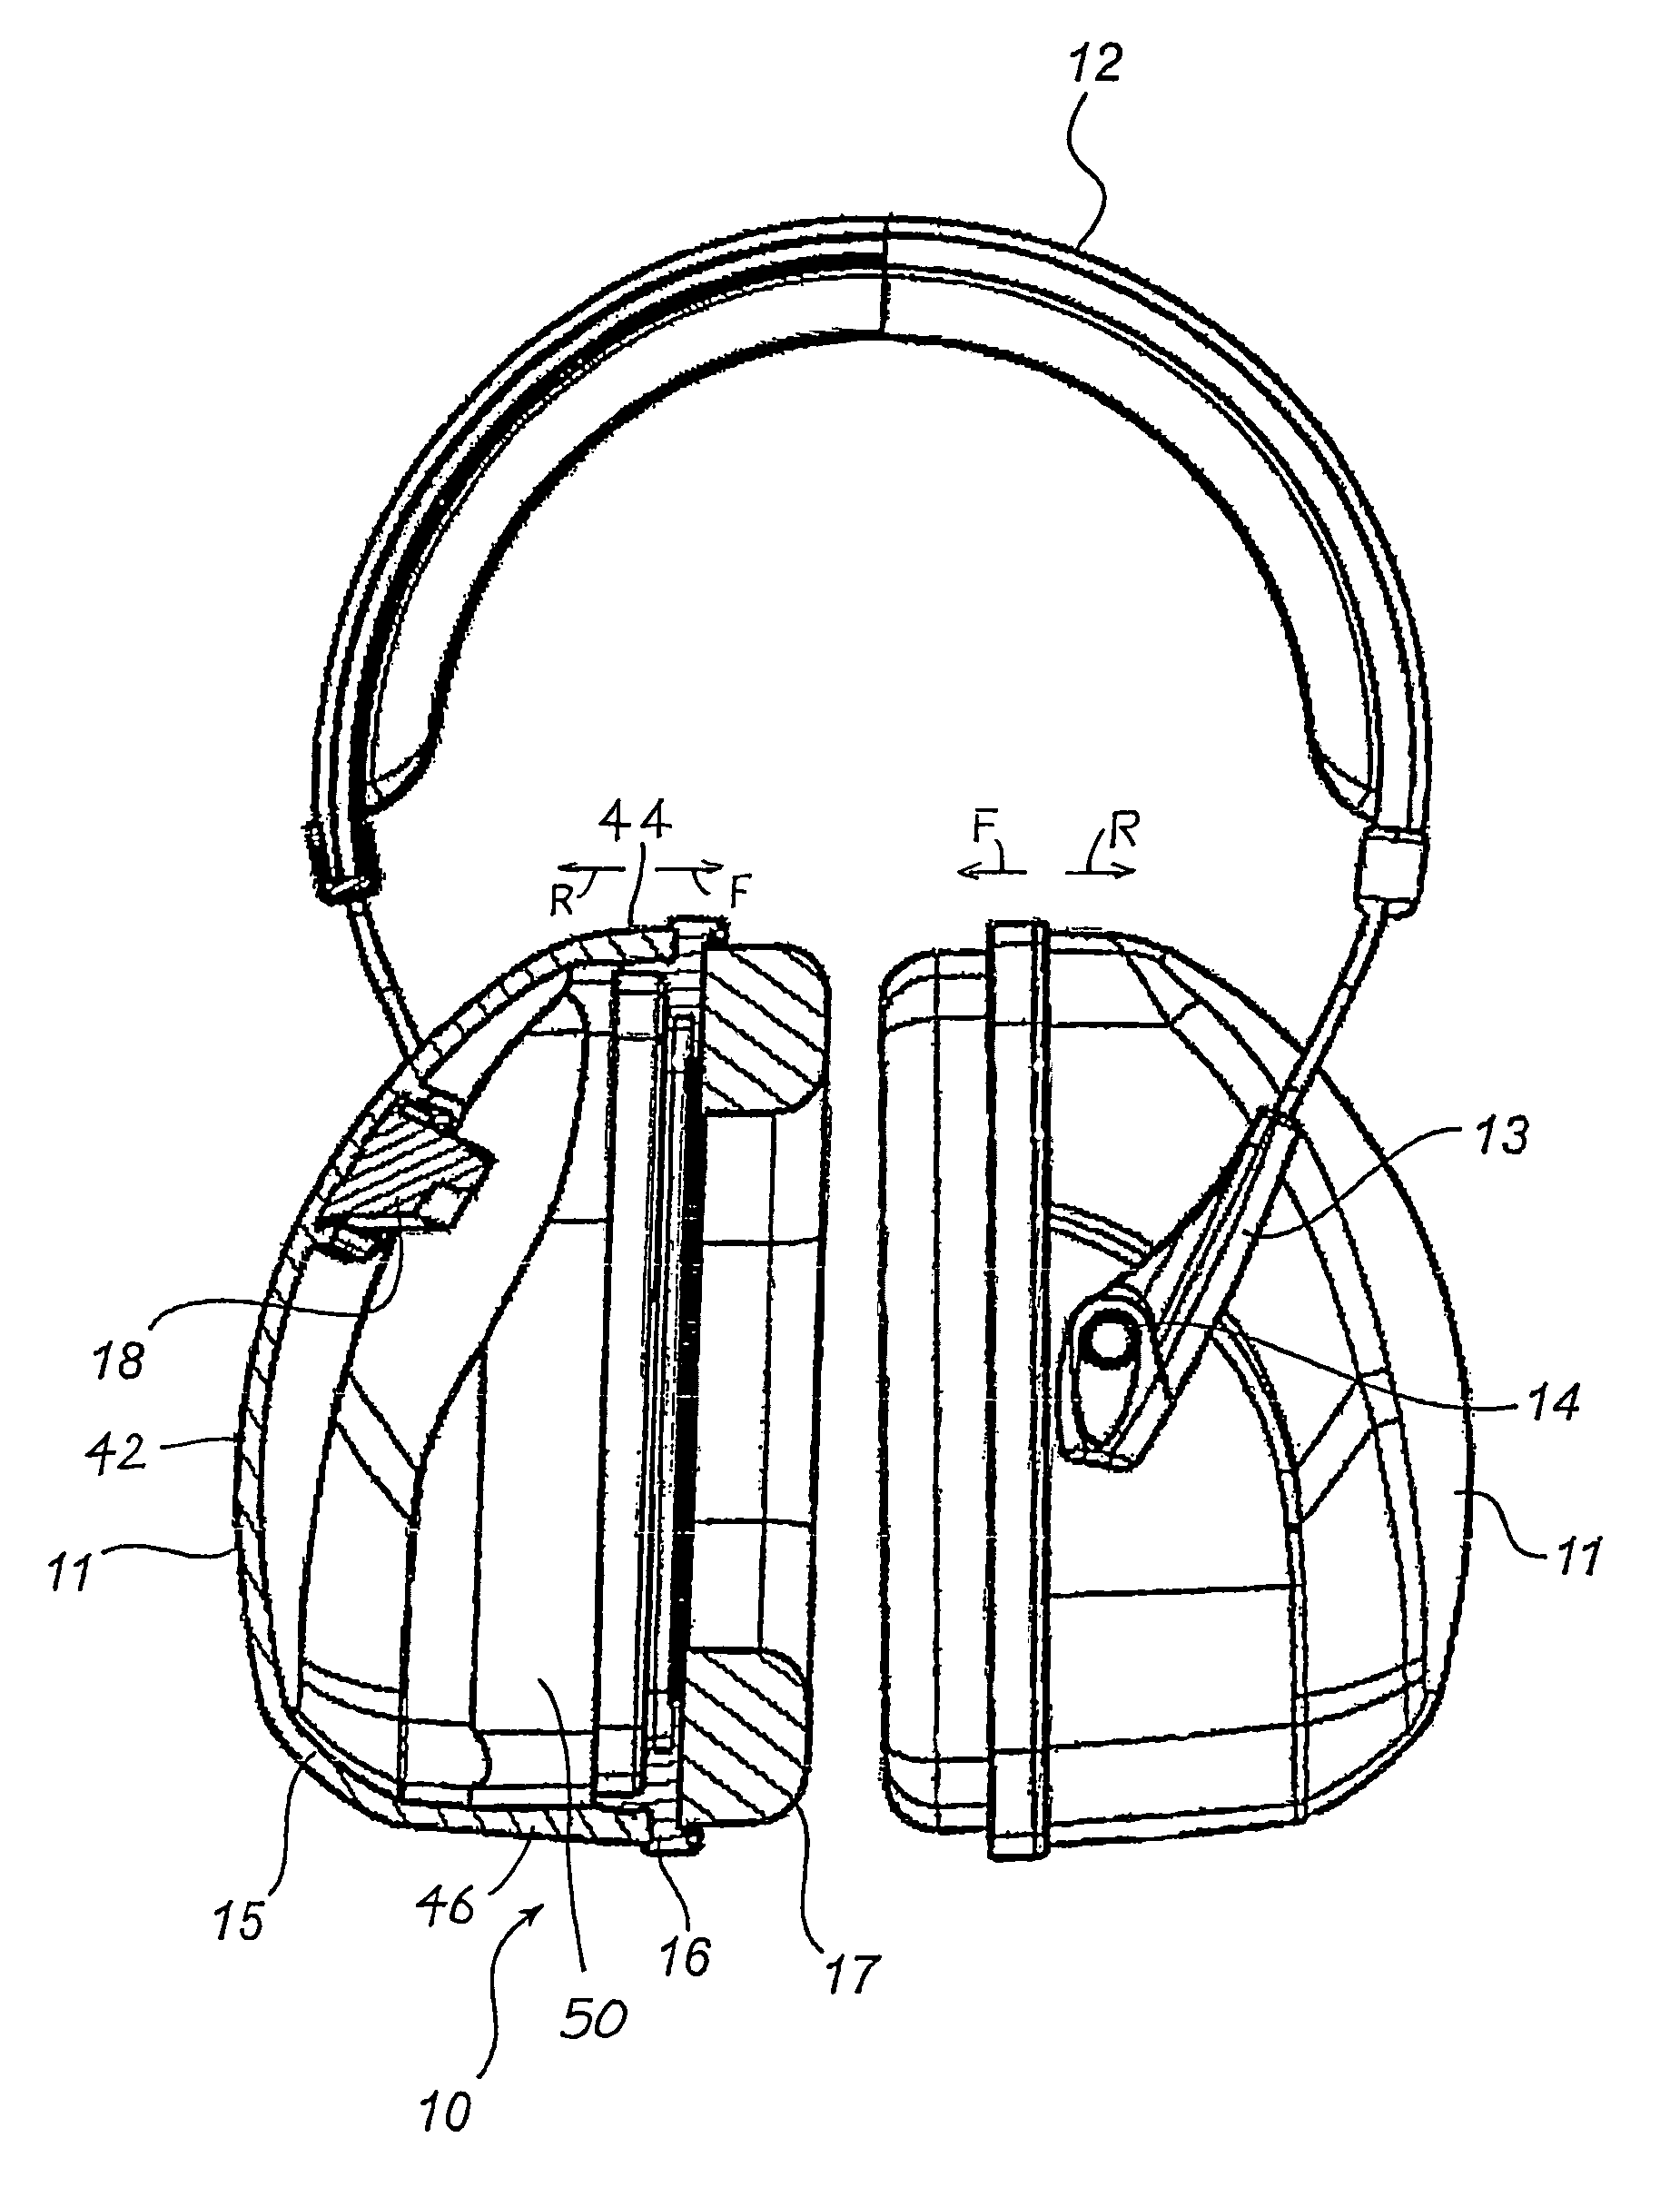 Cap for use as hearing protection